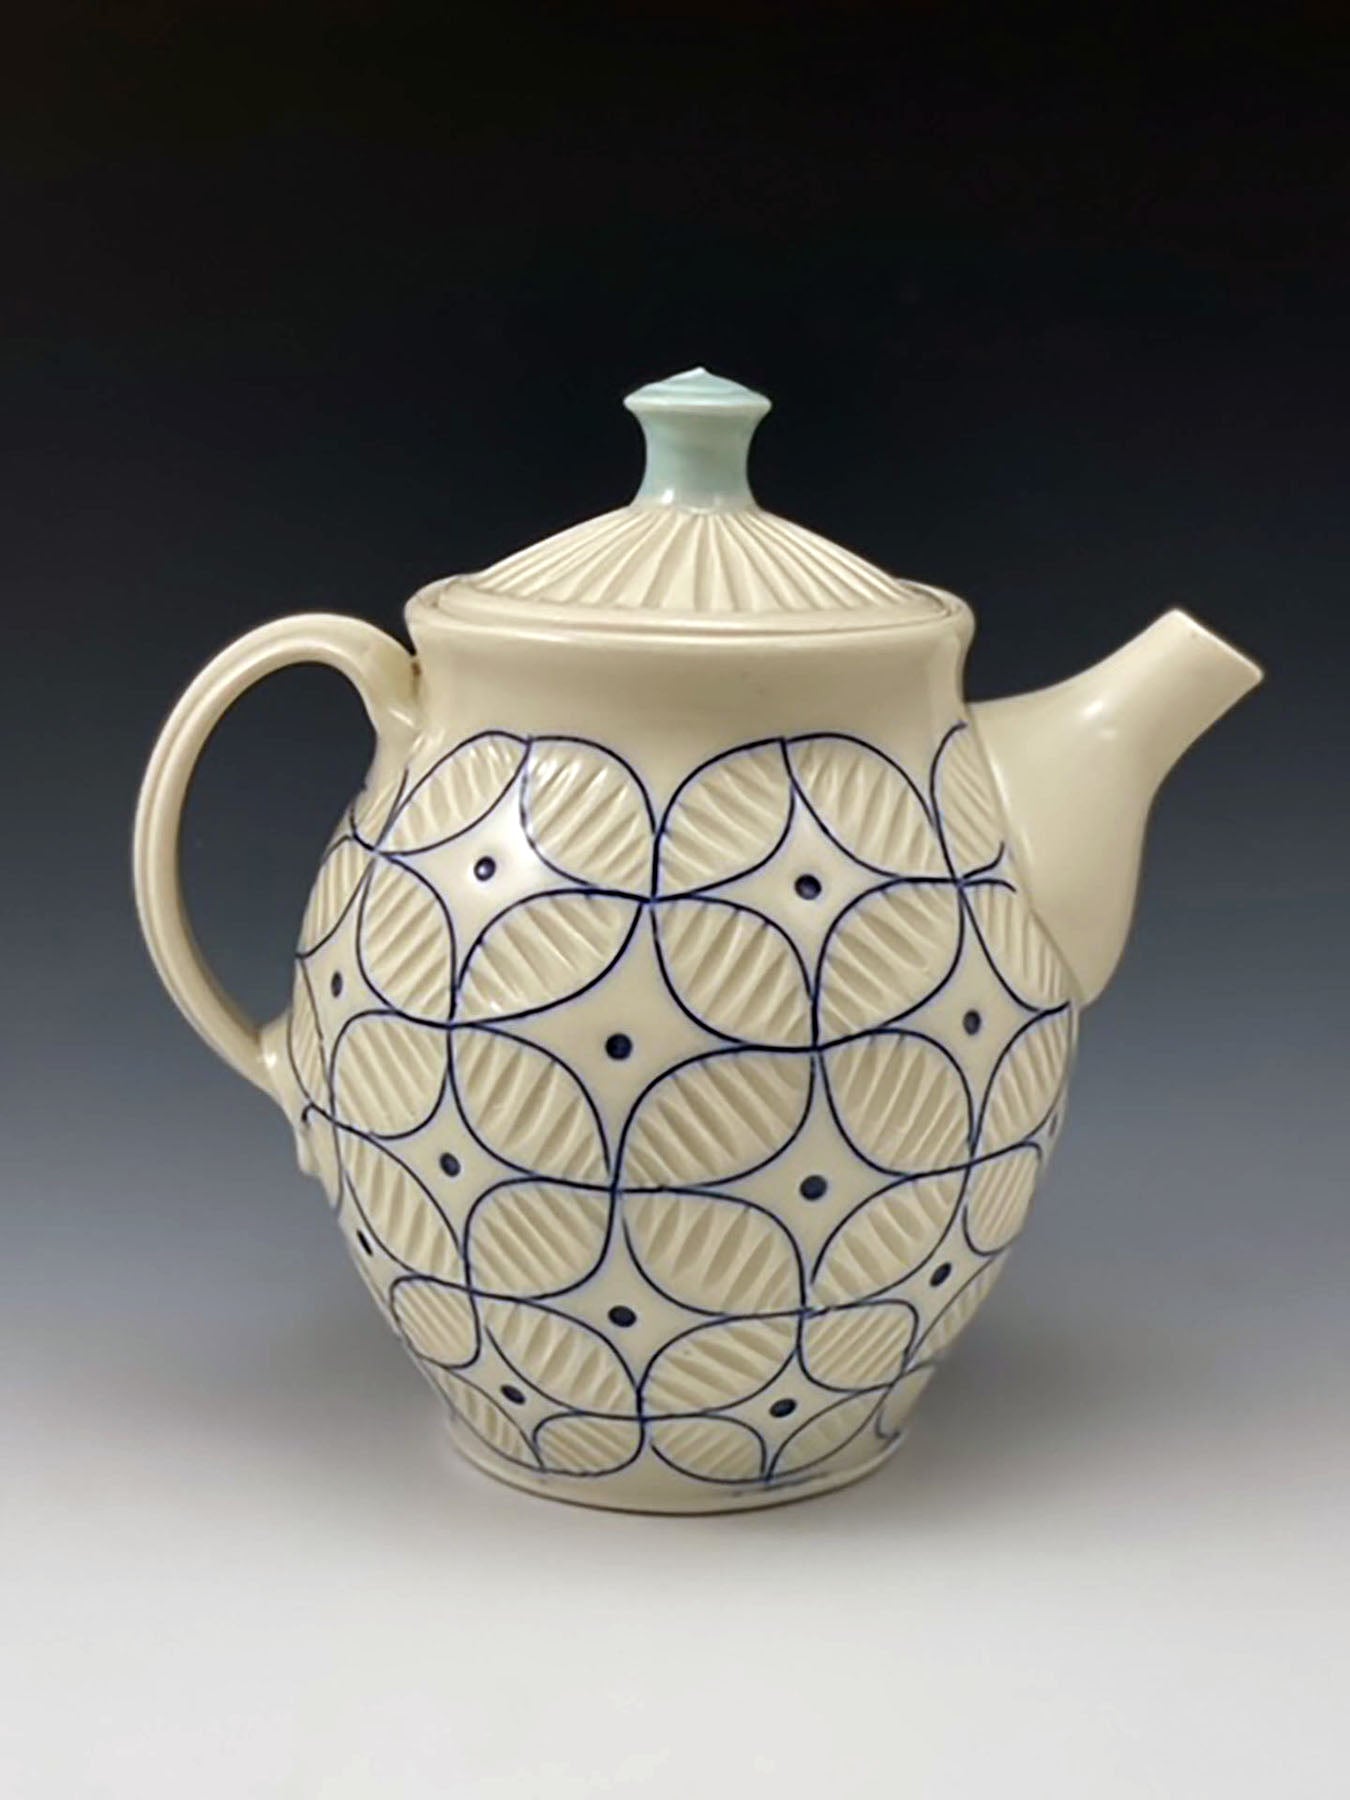 A white handmade porcelain teapot with blue inlay by ceramic artist Julie Wiggins sits against a gradient background. 